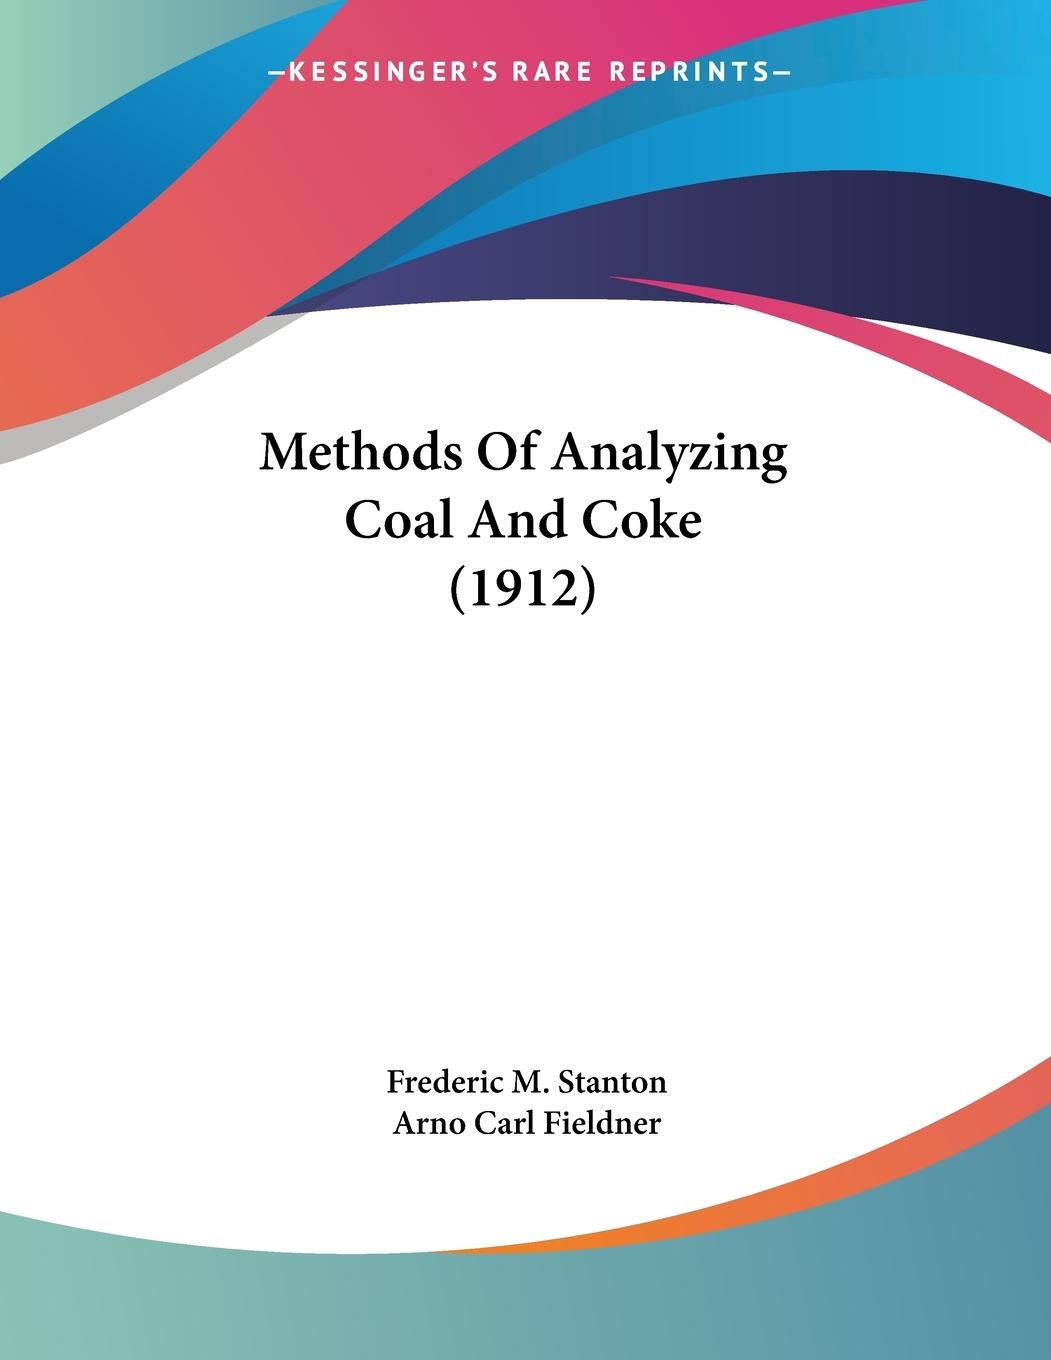 Methods Of Analyzing Coal And Coke (1912) - Stanton, Frederic M. Fieldner, Arno Carl